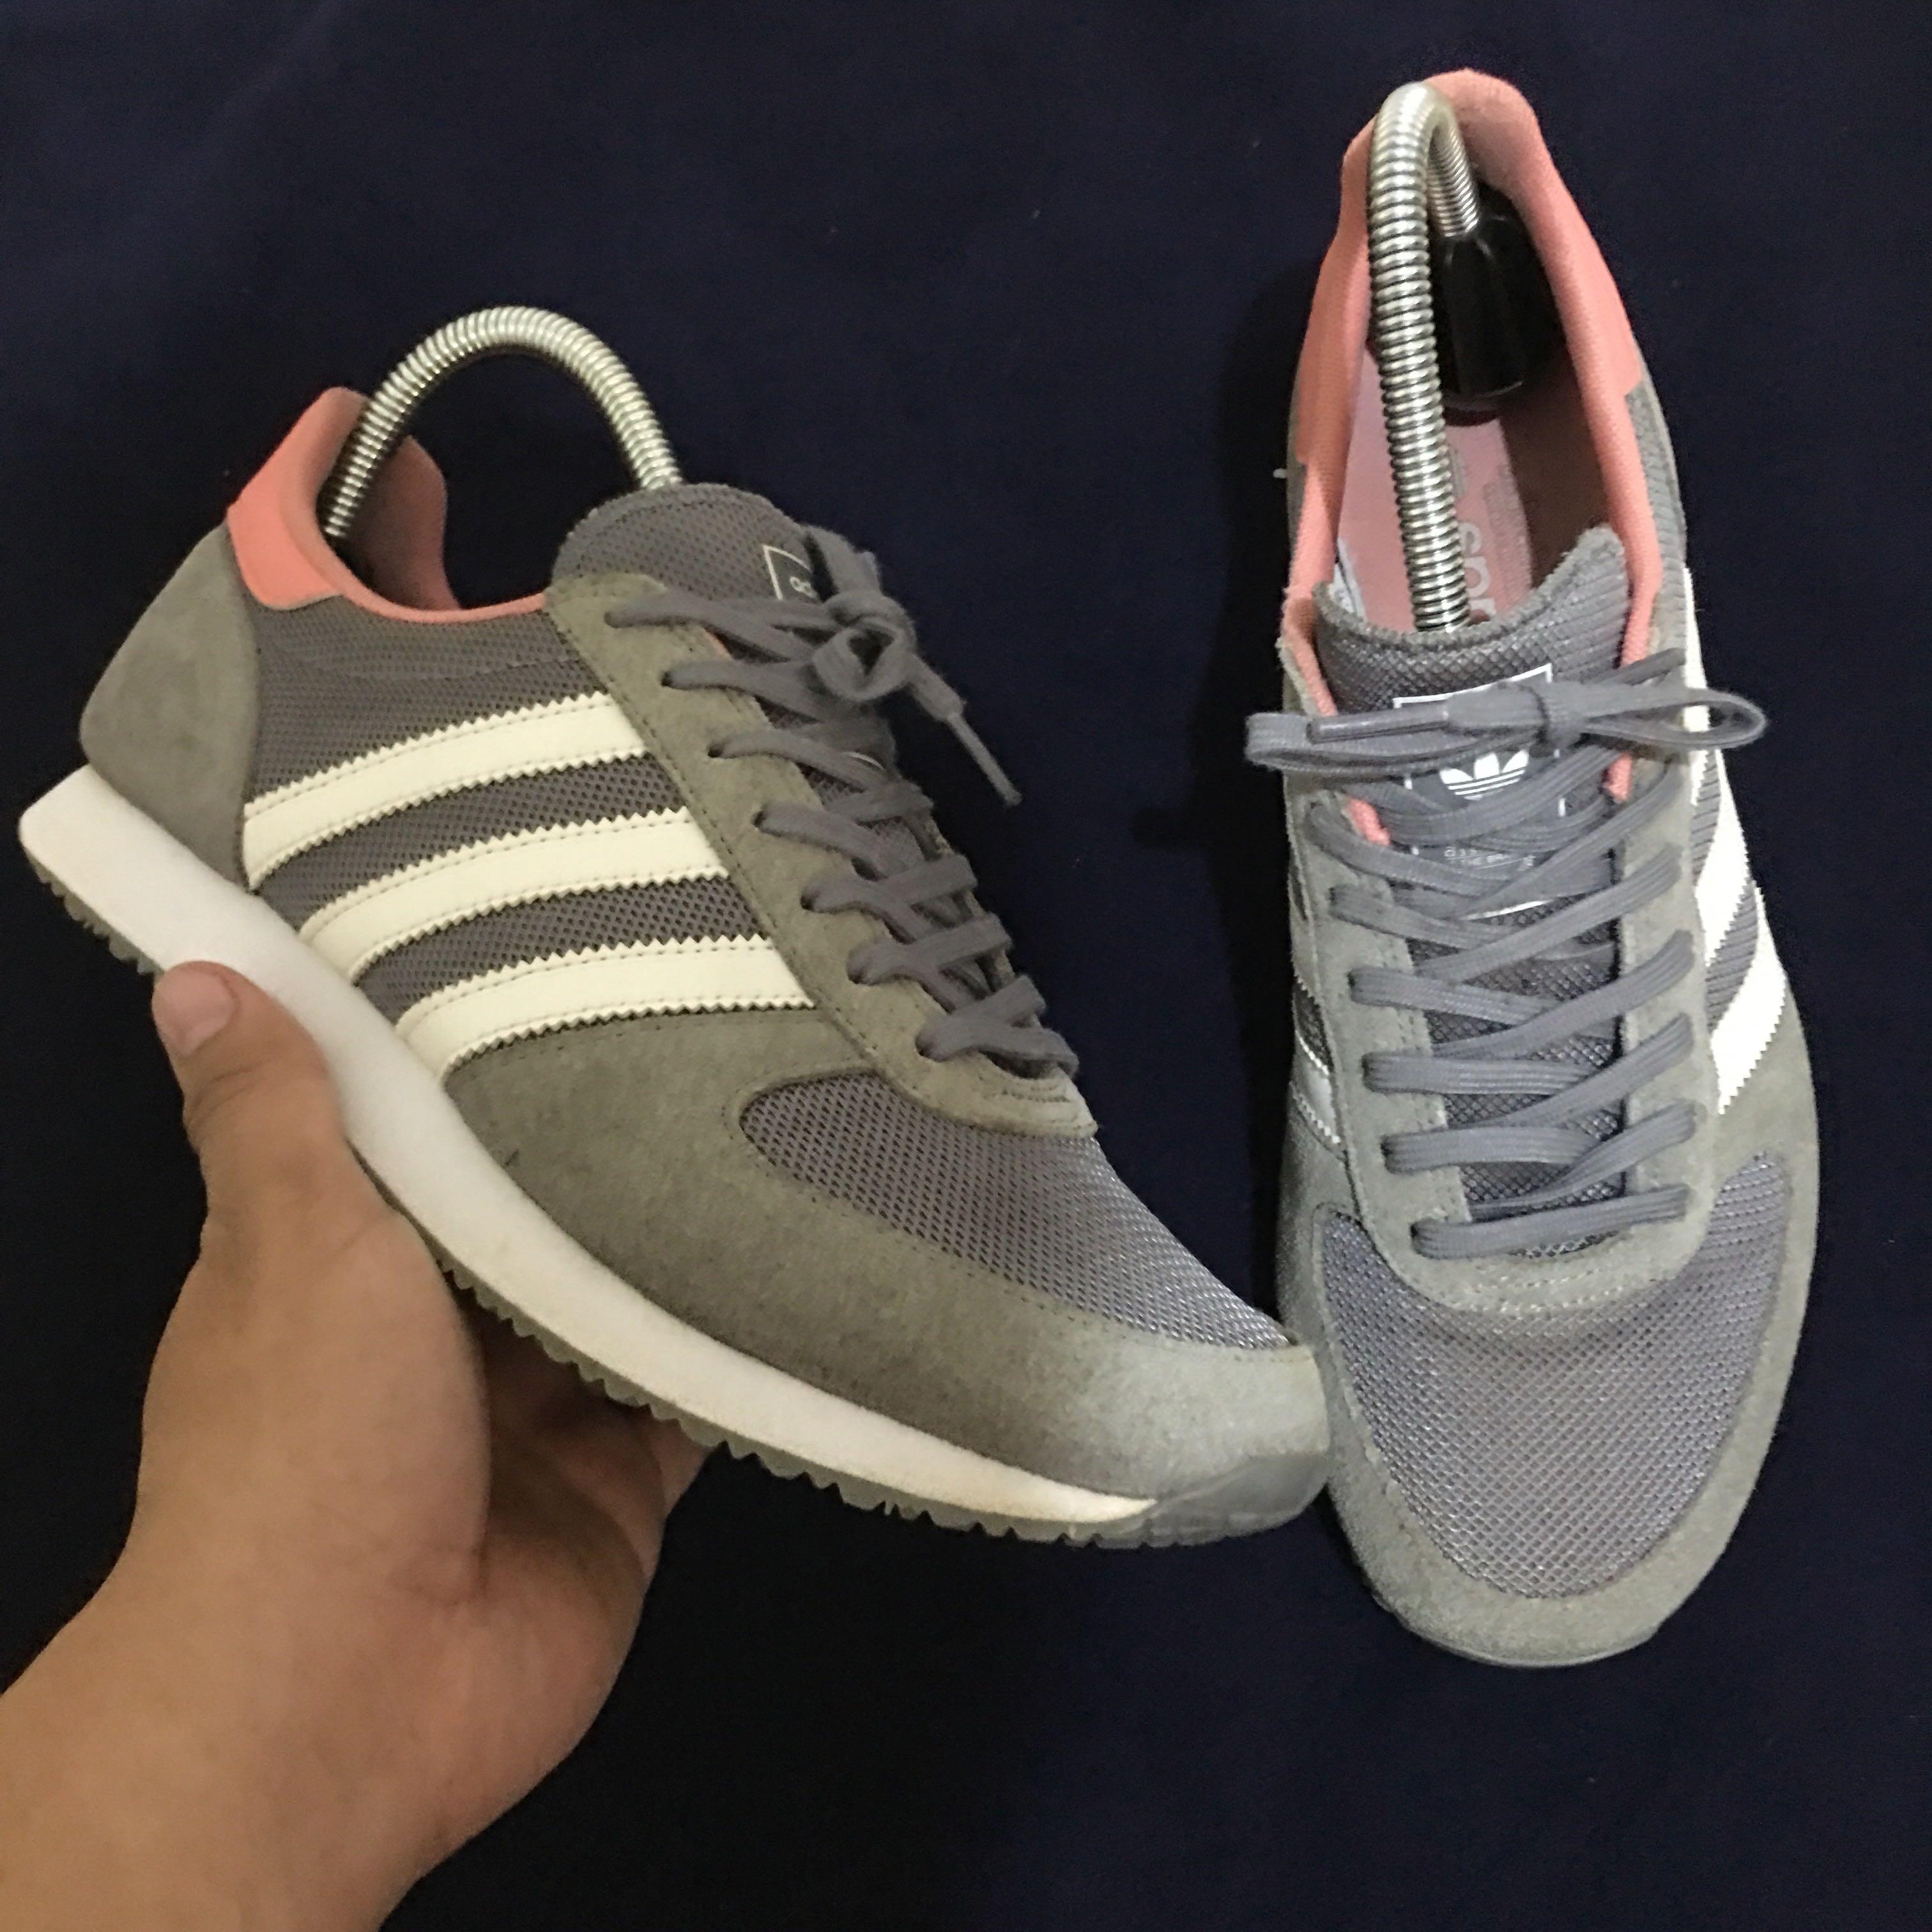 ADIDAS ZX RACER GREY WHITE TRAINERS 